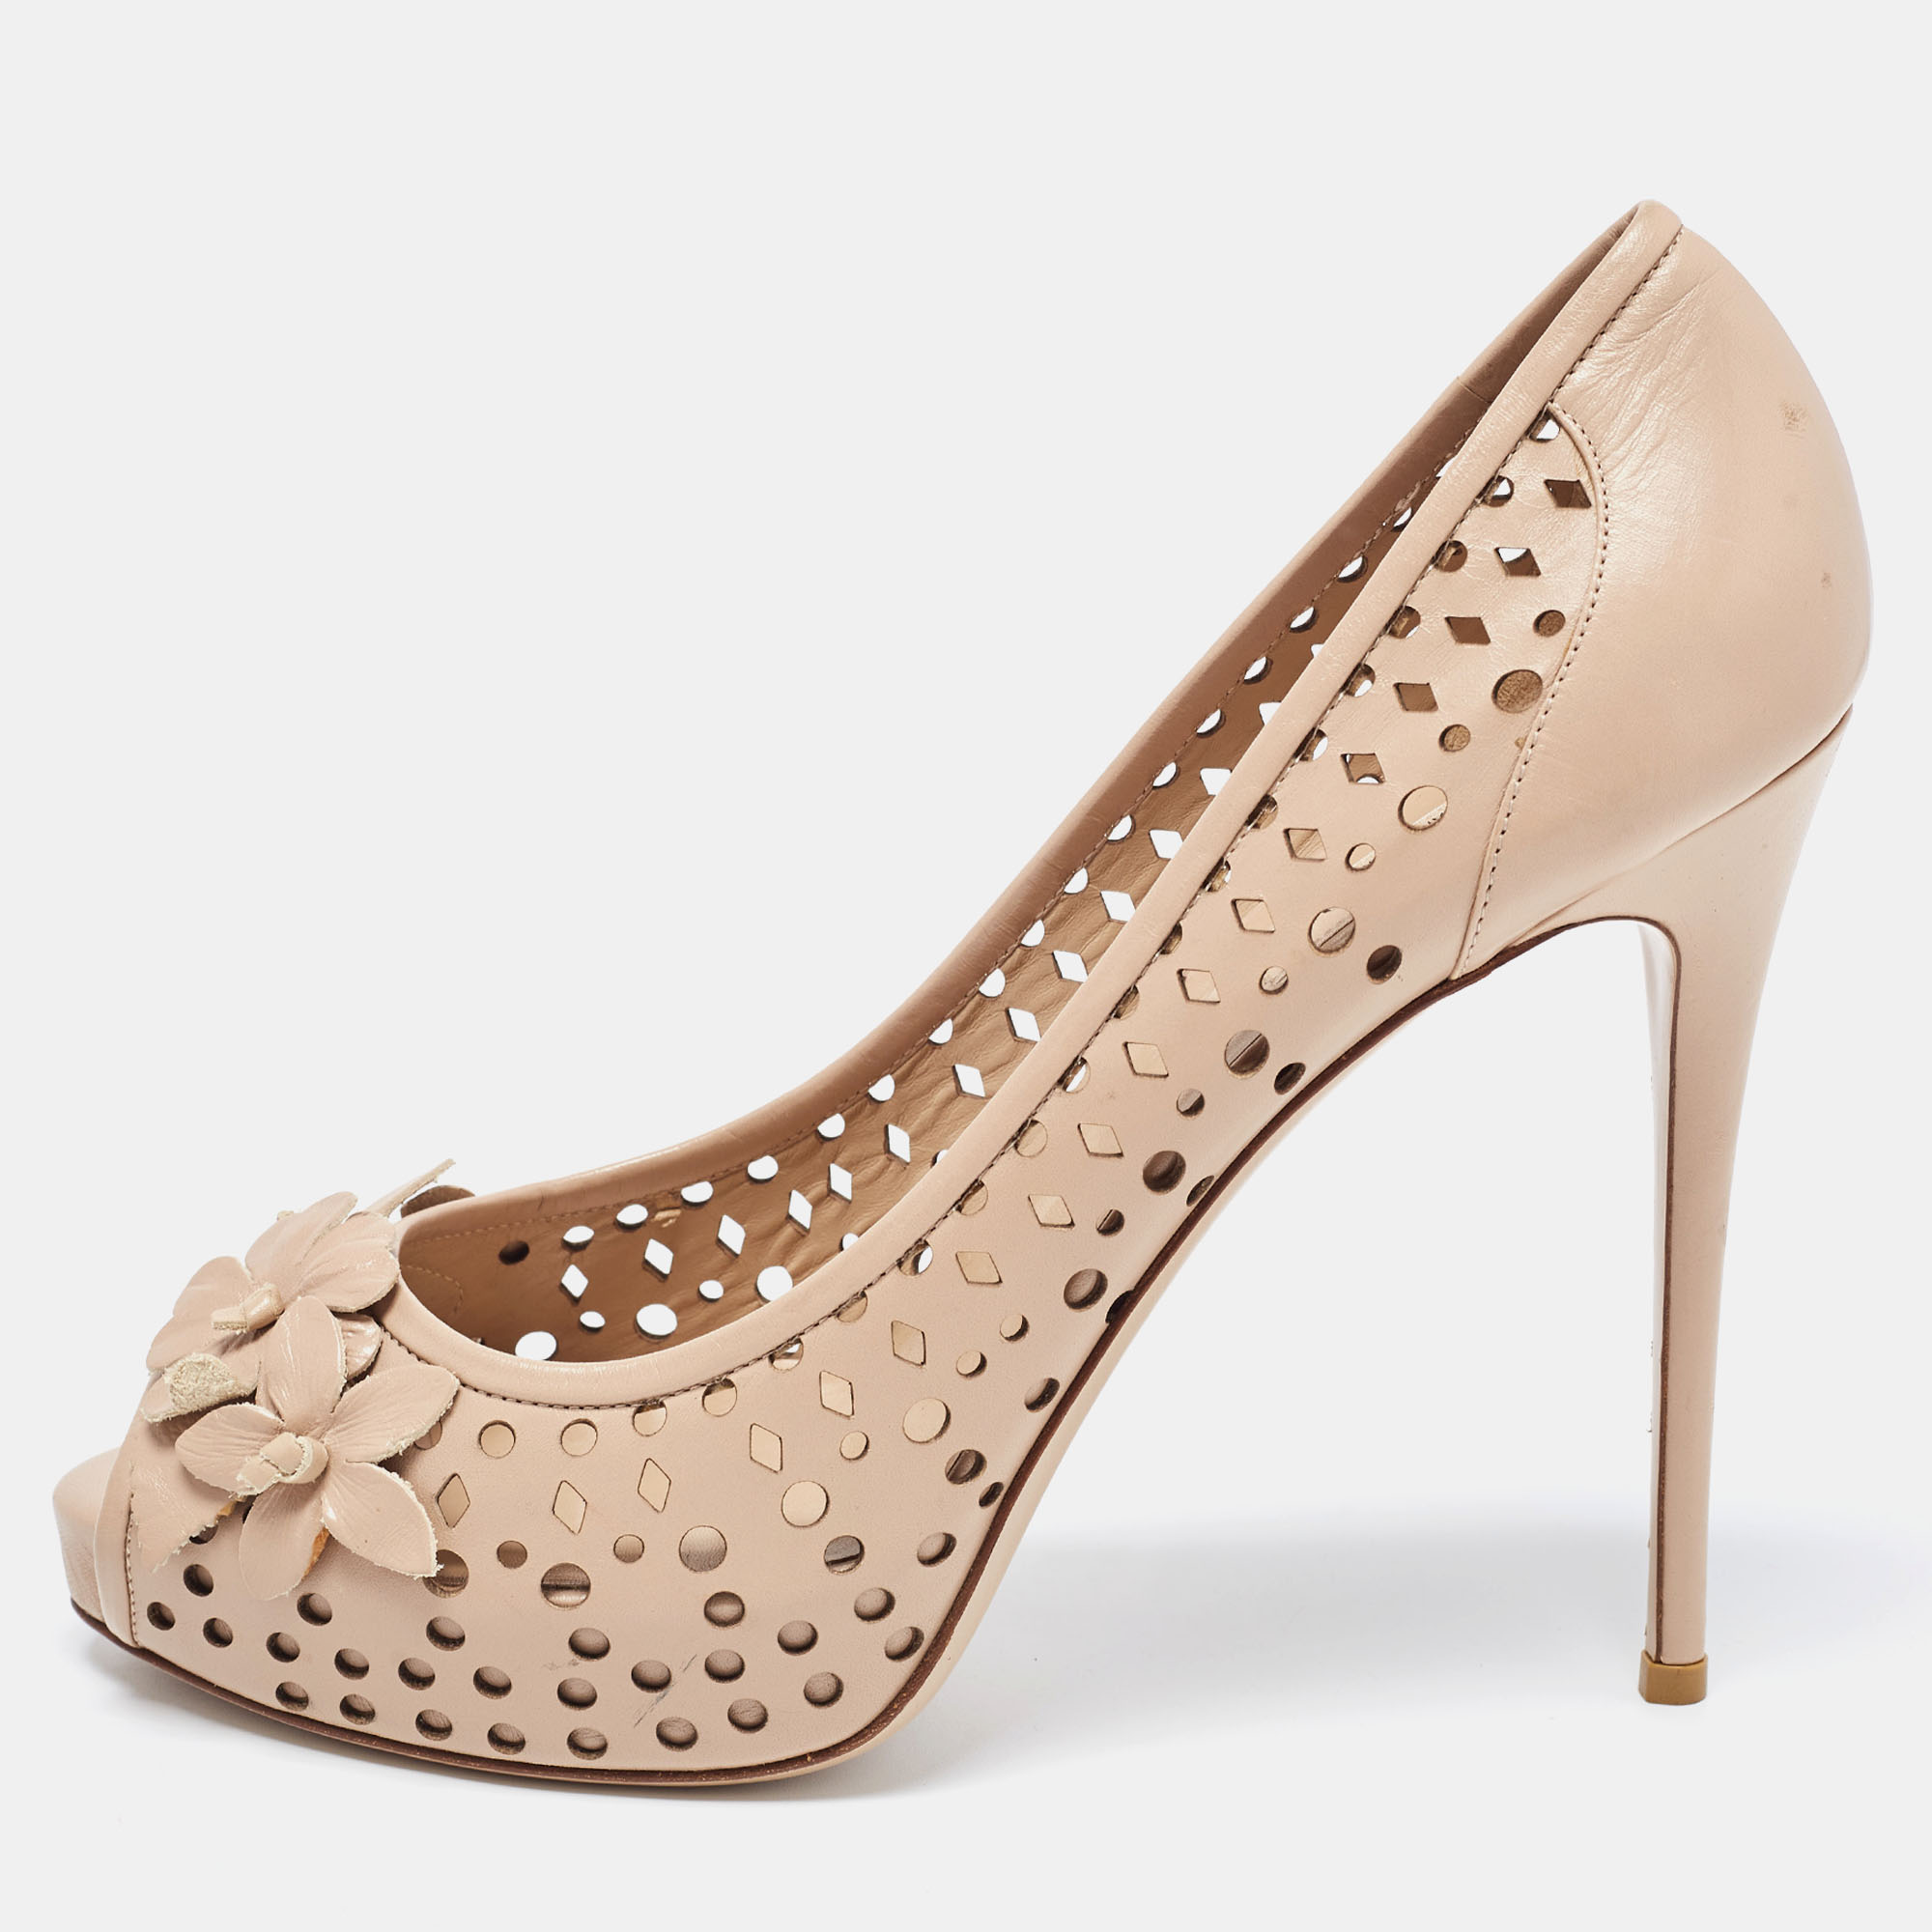 Valentino Beige Perforated Leather Floral Applique Peep Toe Pumps Size 40.5